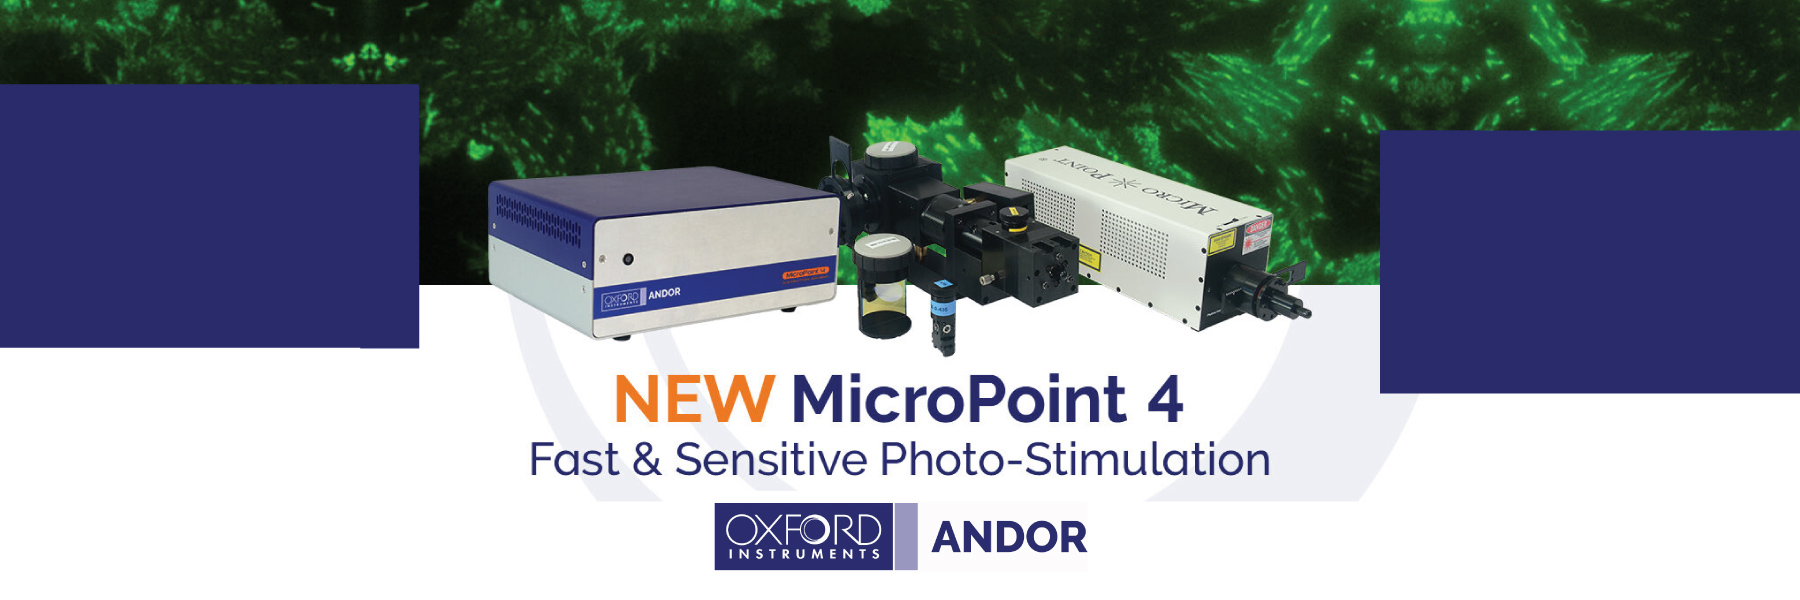 Andor MicroPoint 4